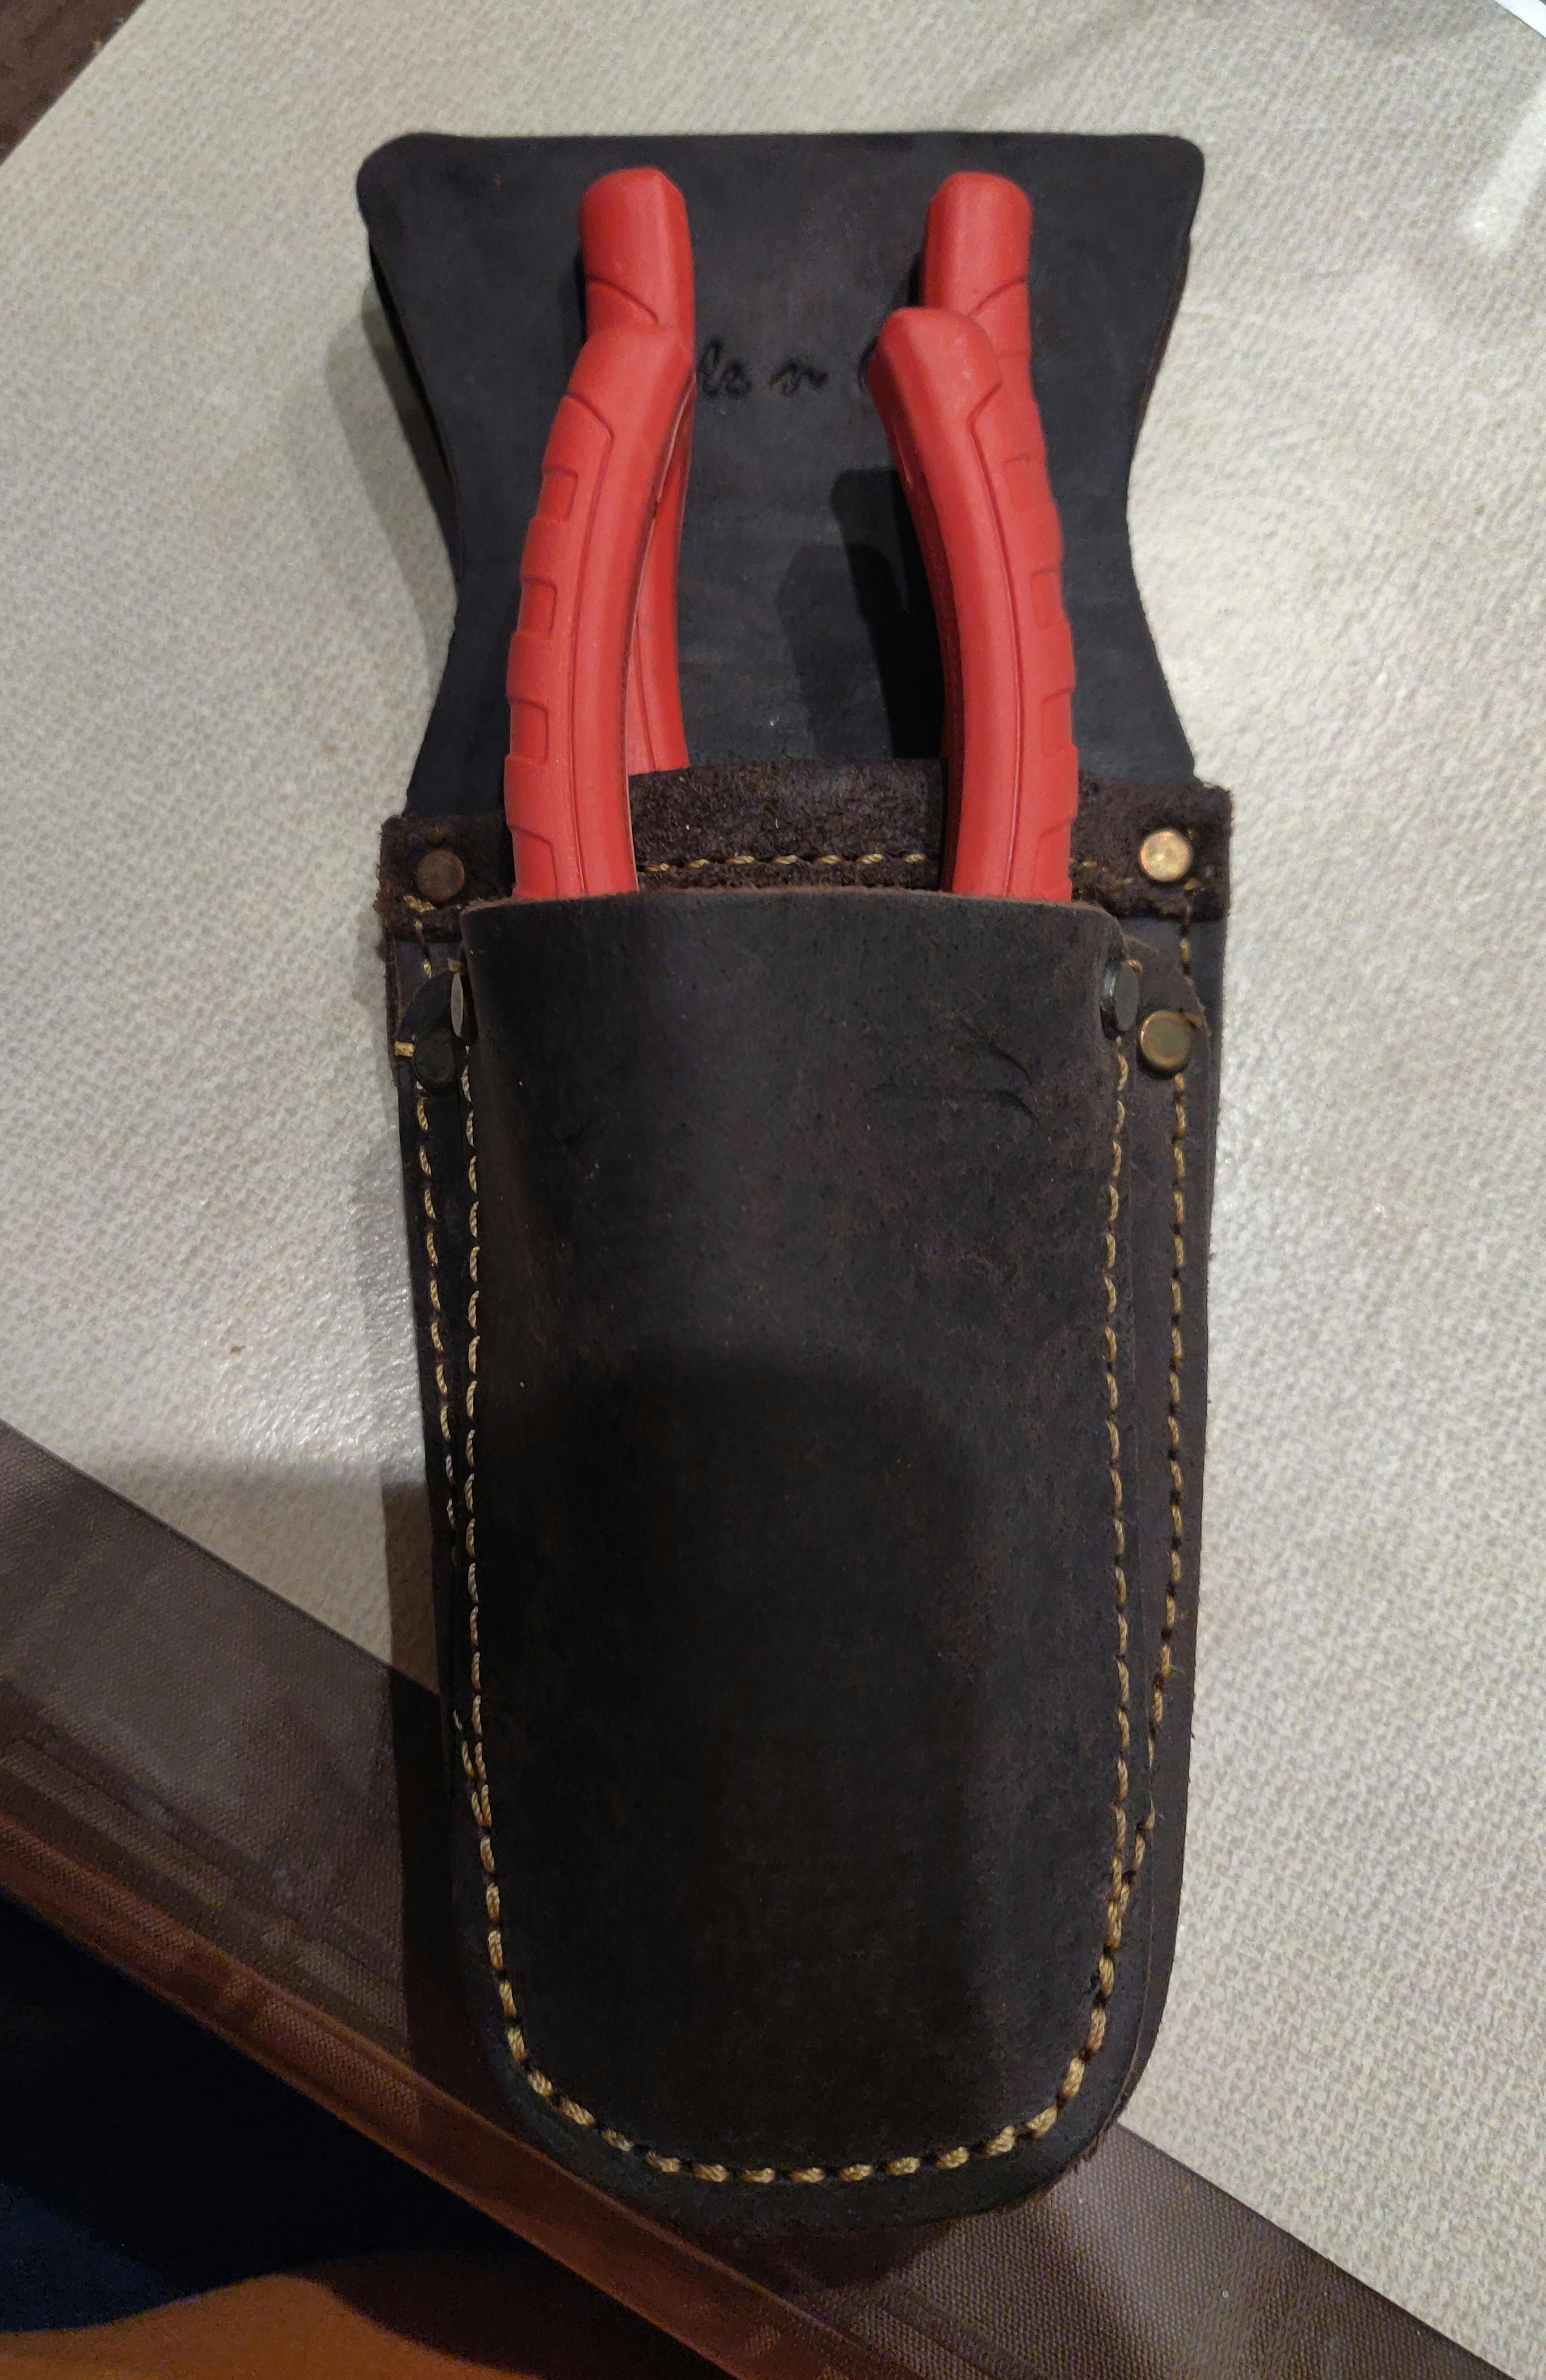 3 Pocket Pliers & Tool Holder in Oiled Leather | Style n Craft 